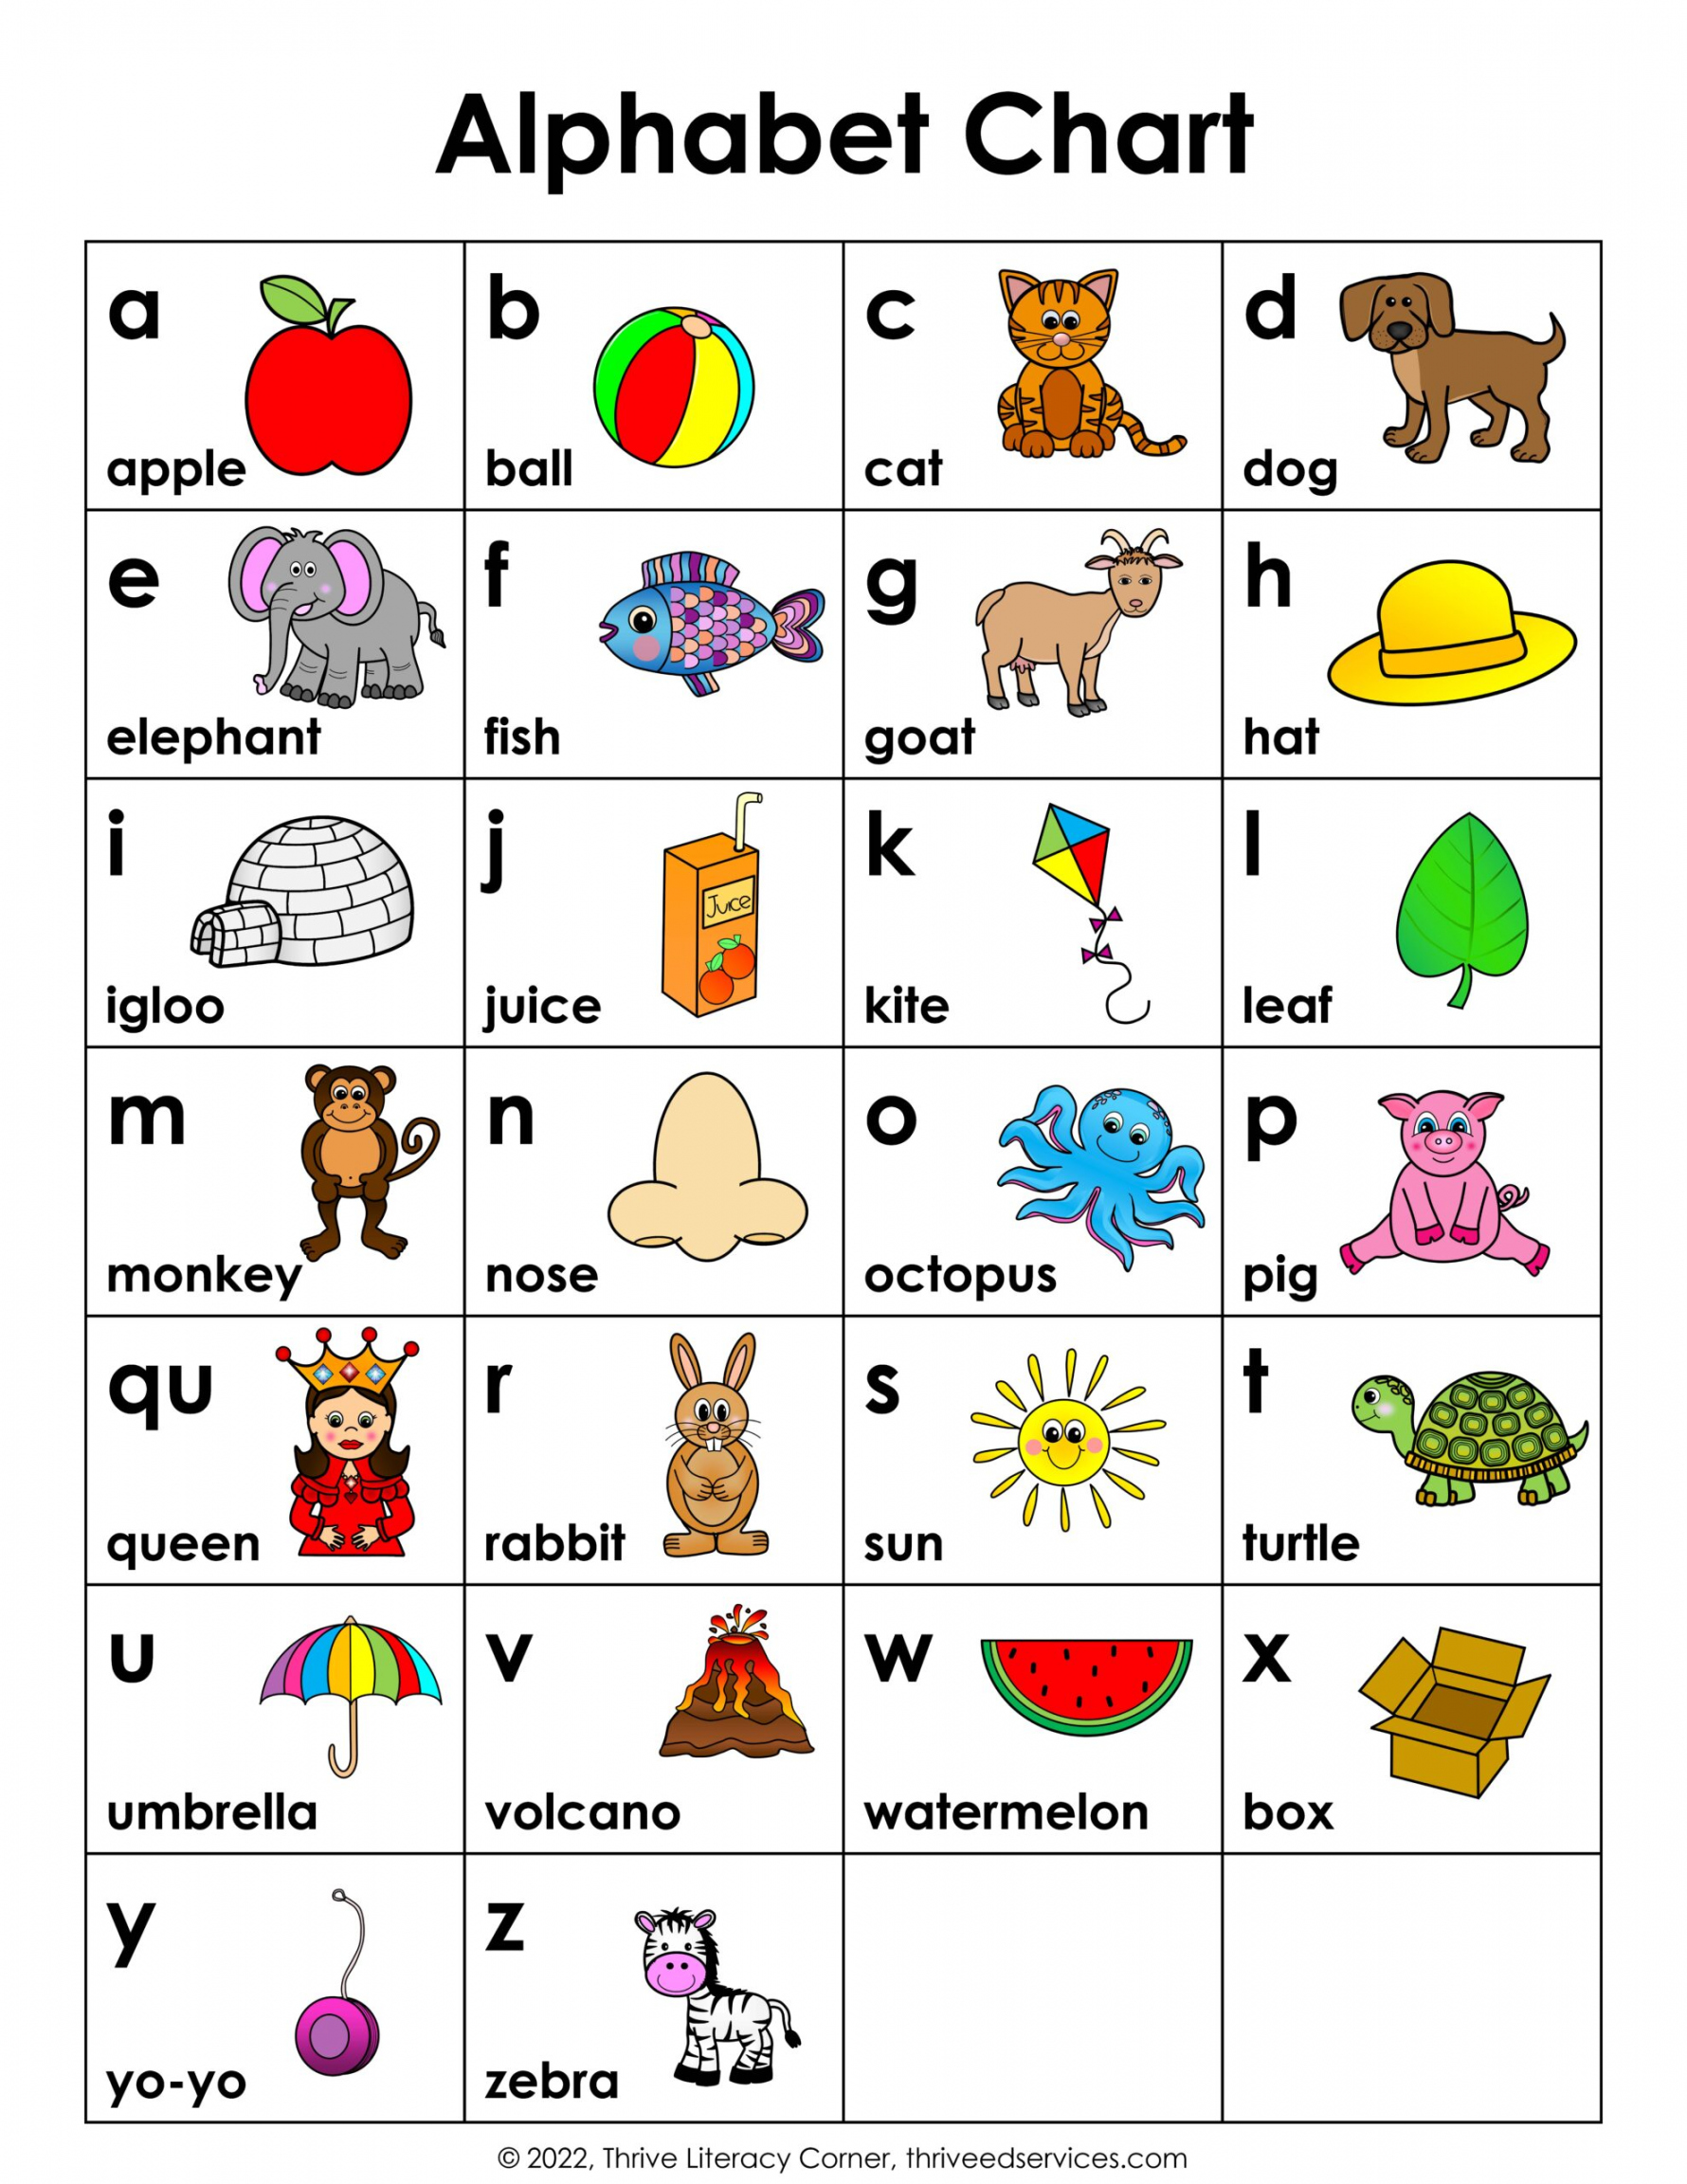 ABC Chart: How To Use An Alphabet Chart+ Free Printable - FREE Printables - Free Printable Abc Chart